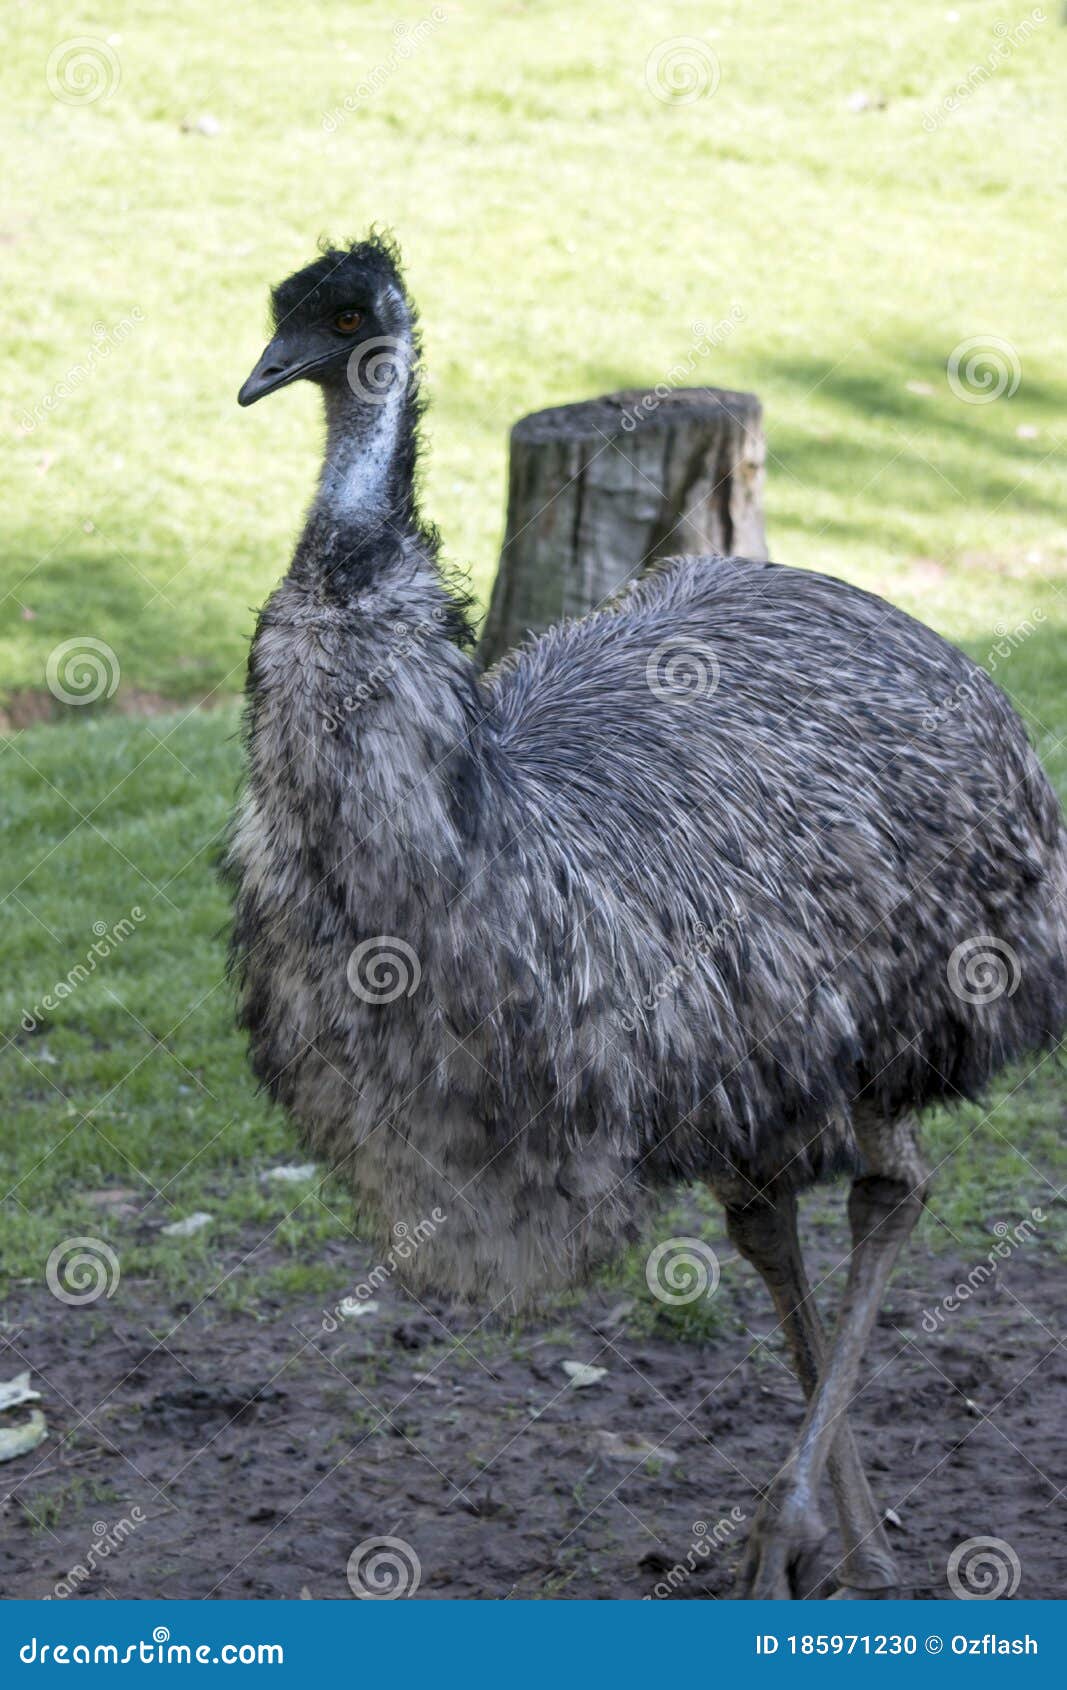 The Australian Emu is a Tall Bird with a Long Neck Stock Photo Image of feathers: 185971230